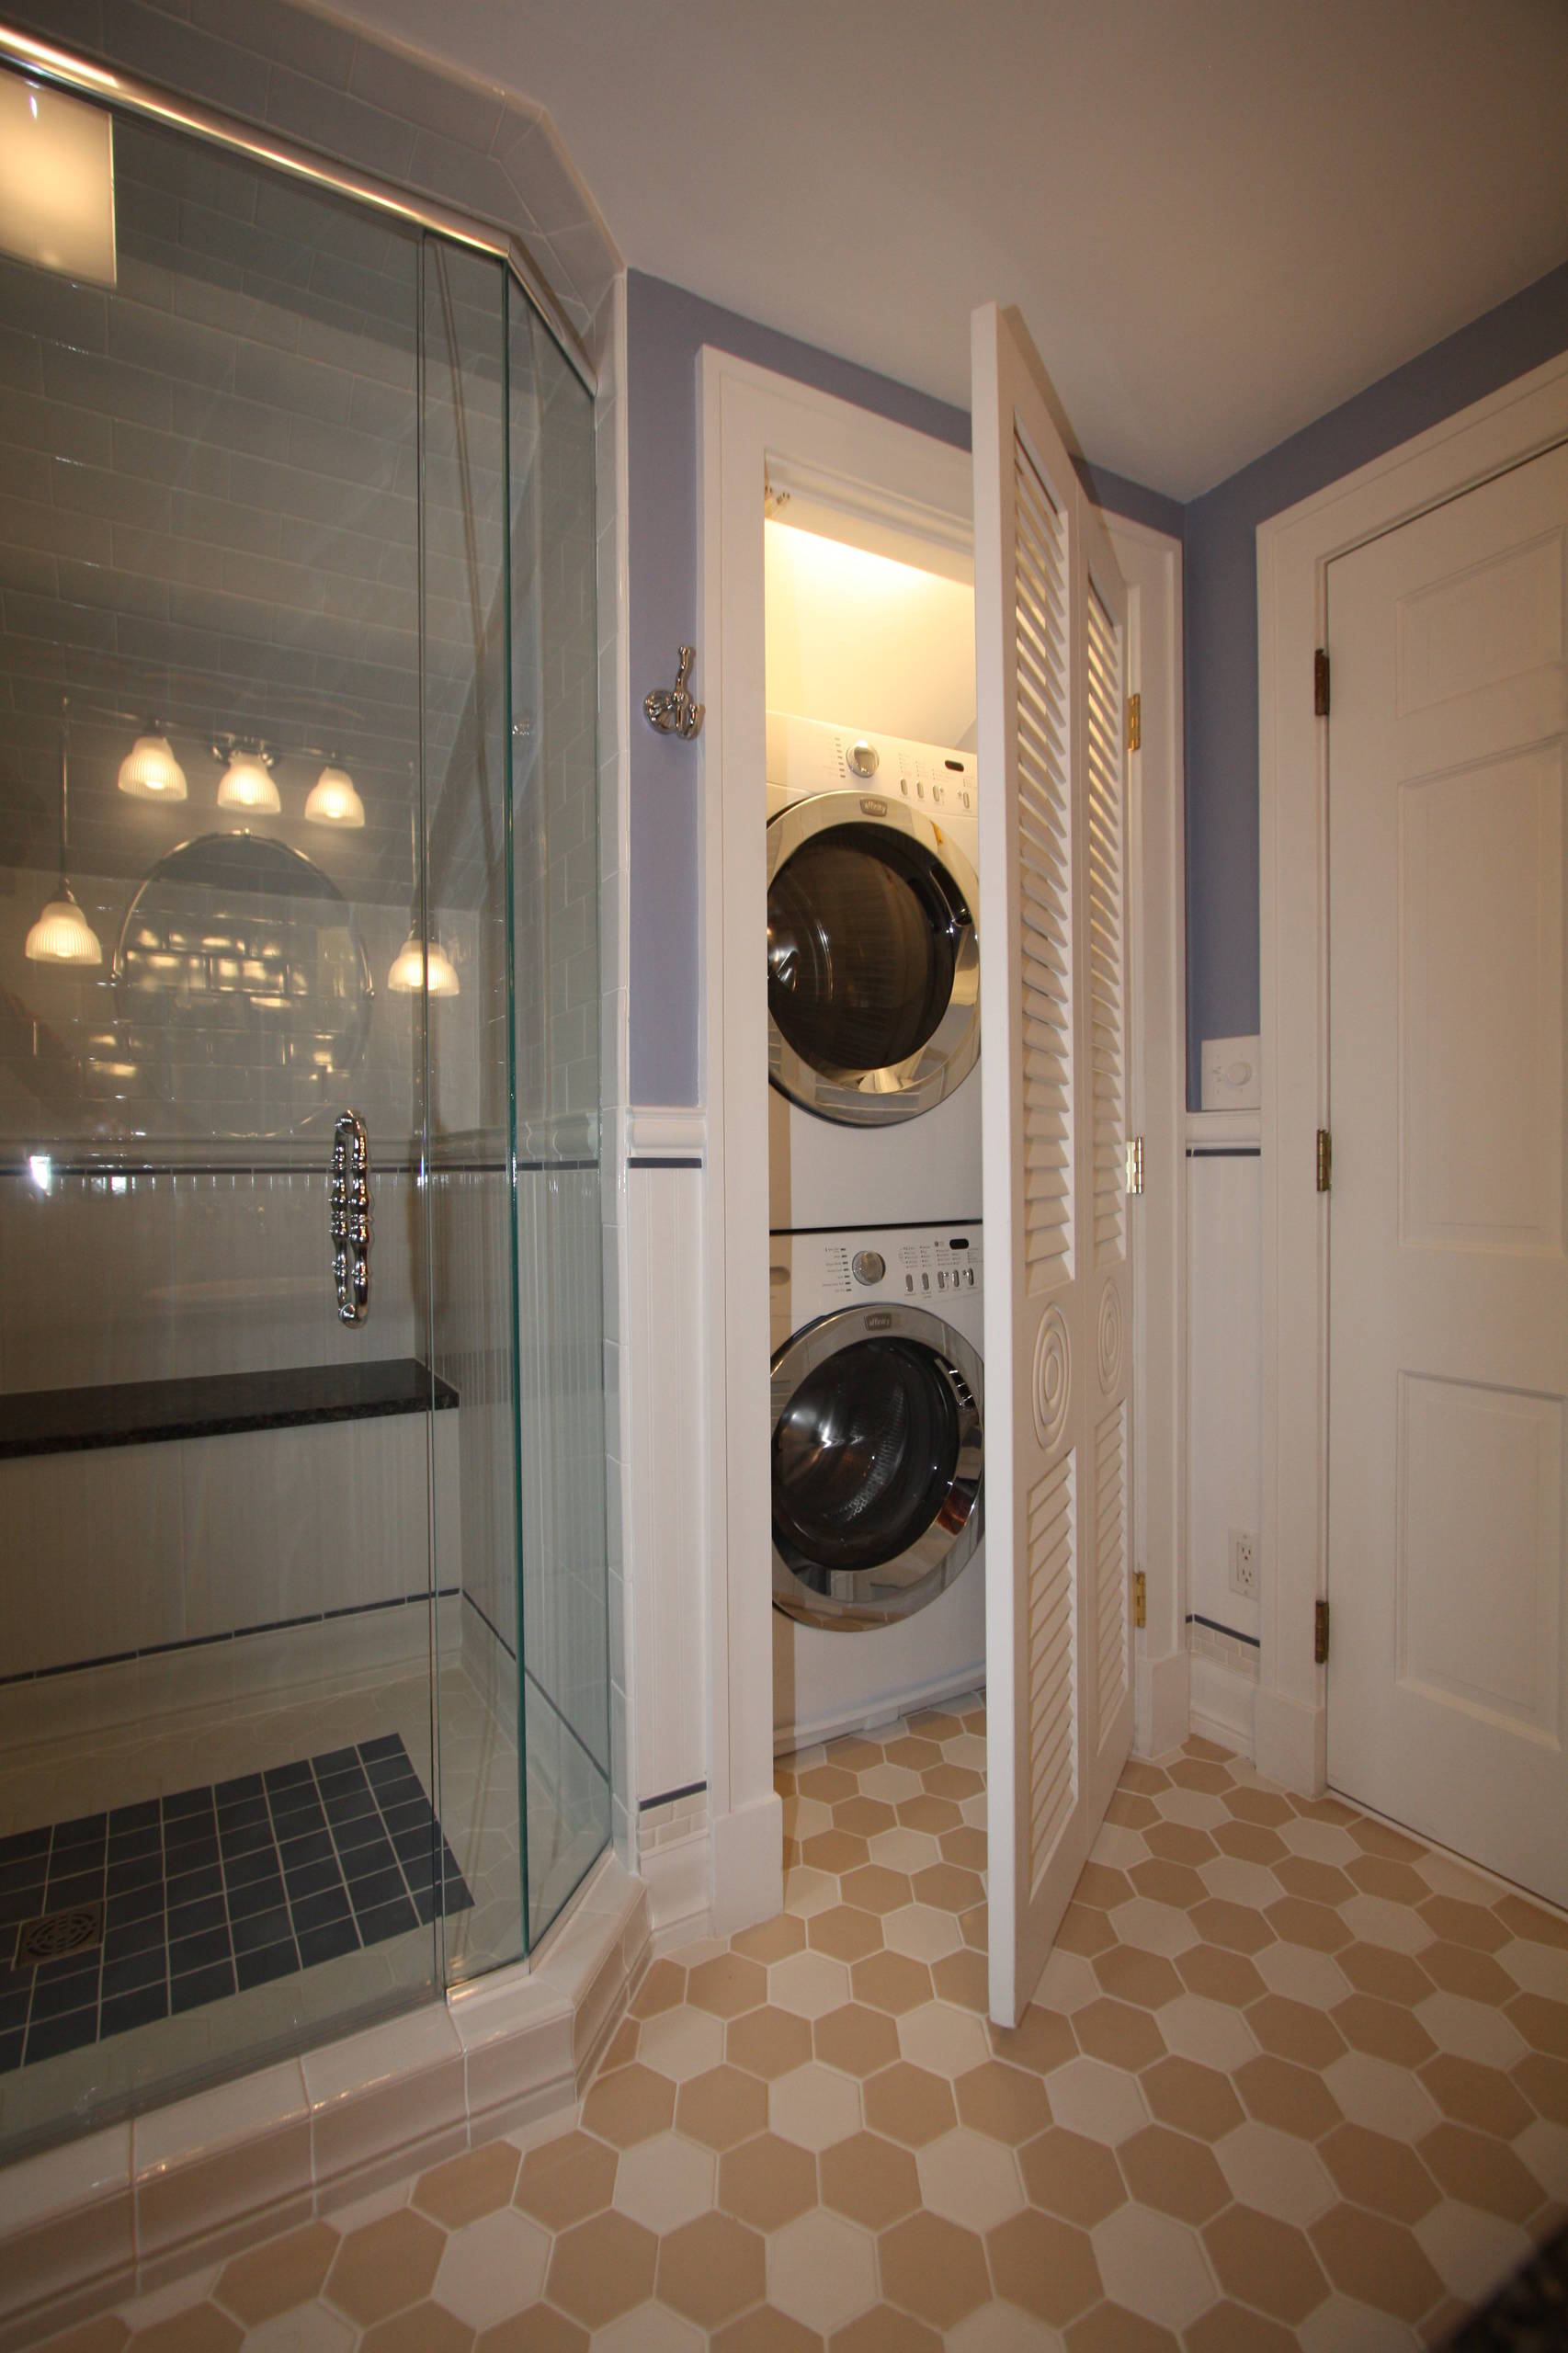 Stackable Washer And Dryer In Bathroom - Photos & Ideas | Houzz